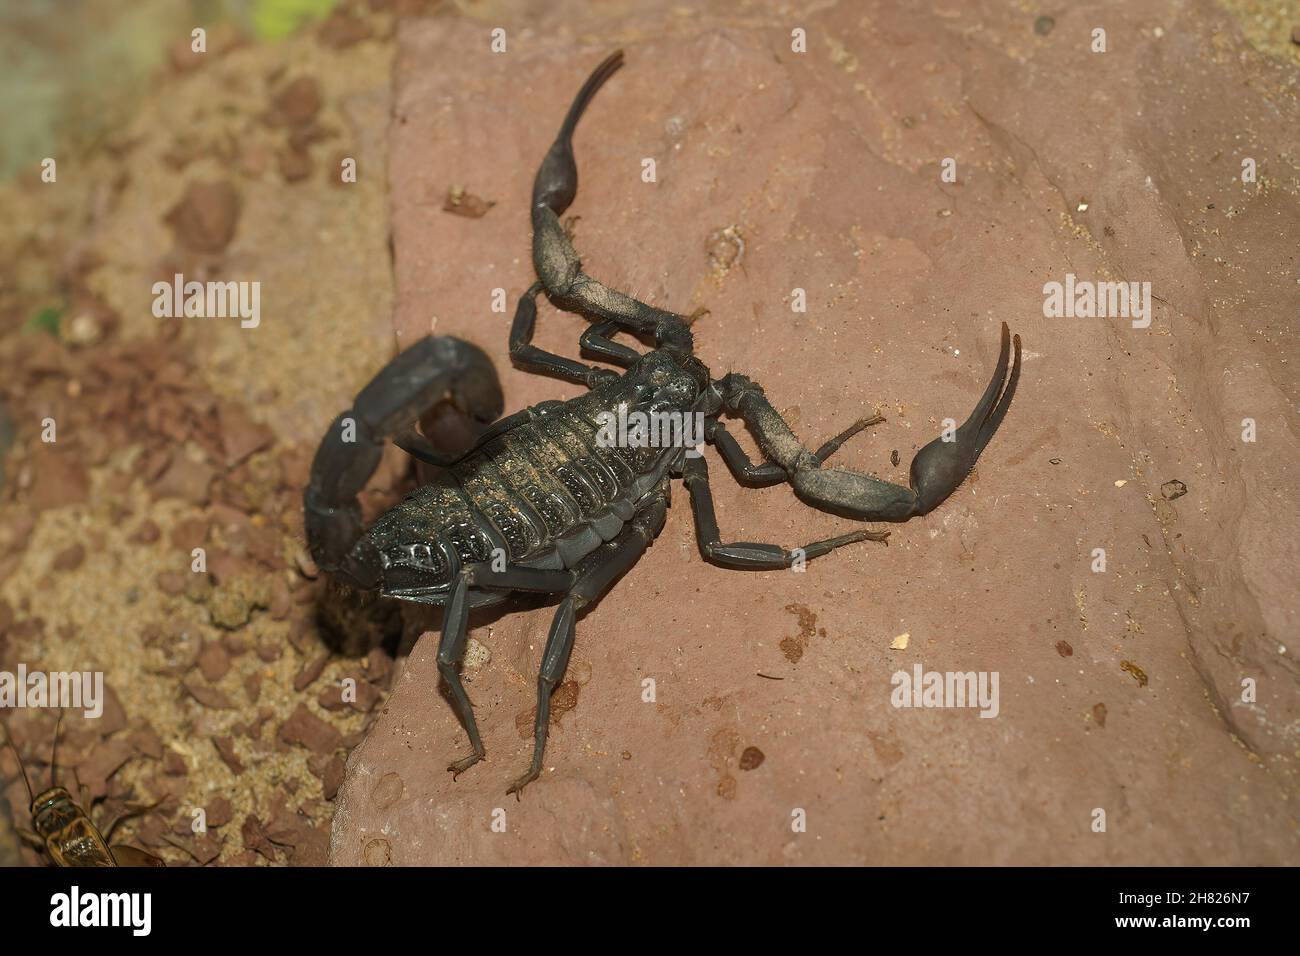 Closeup on a rarely photograhped Hottentotta franz werneri scorpion Stock Photo